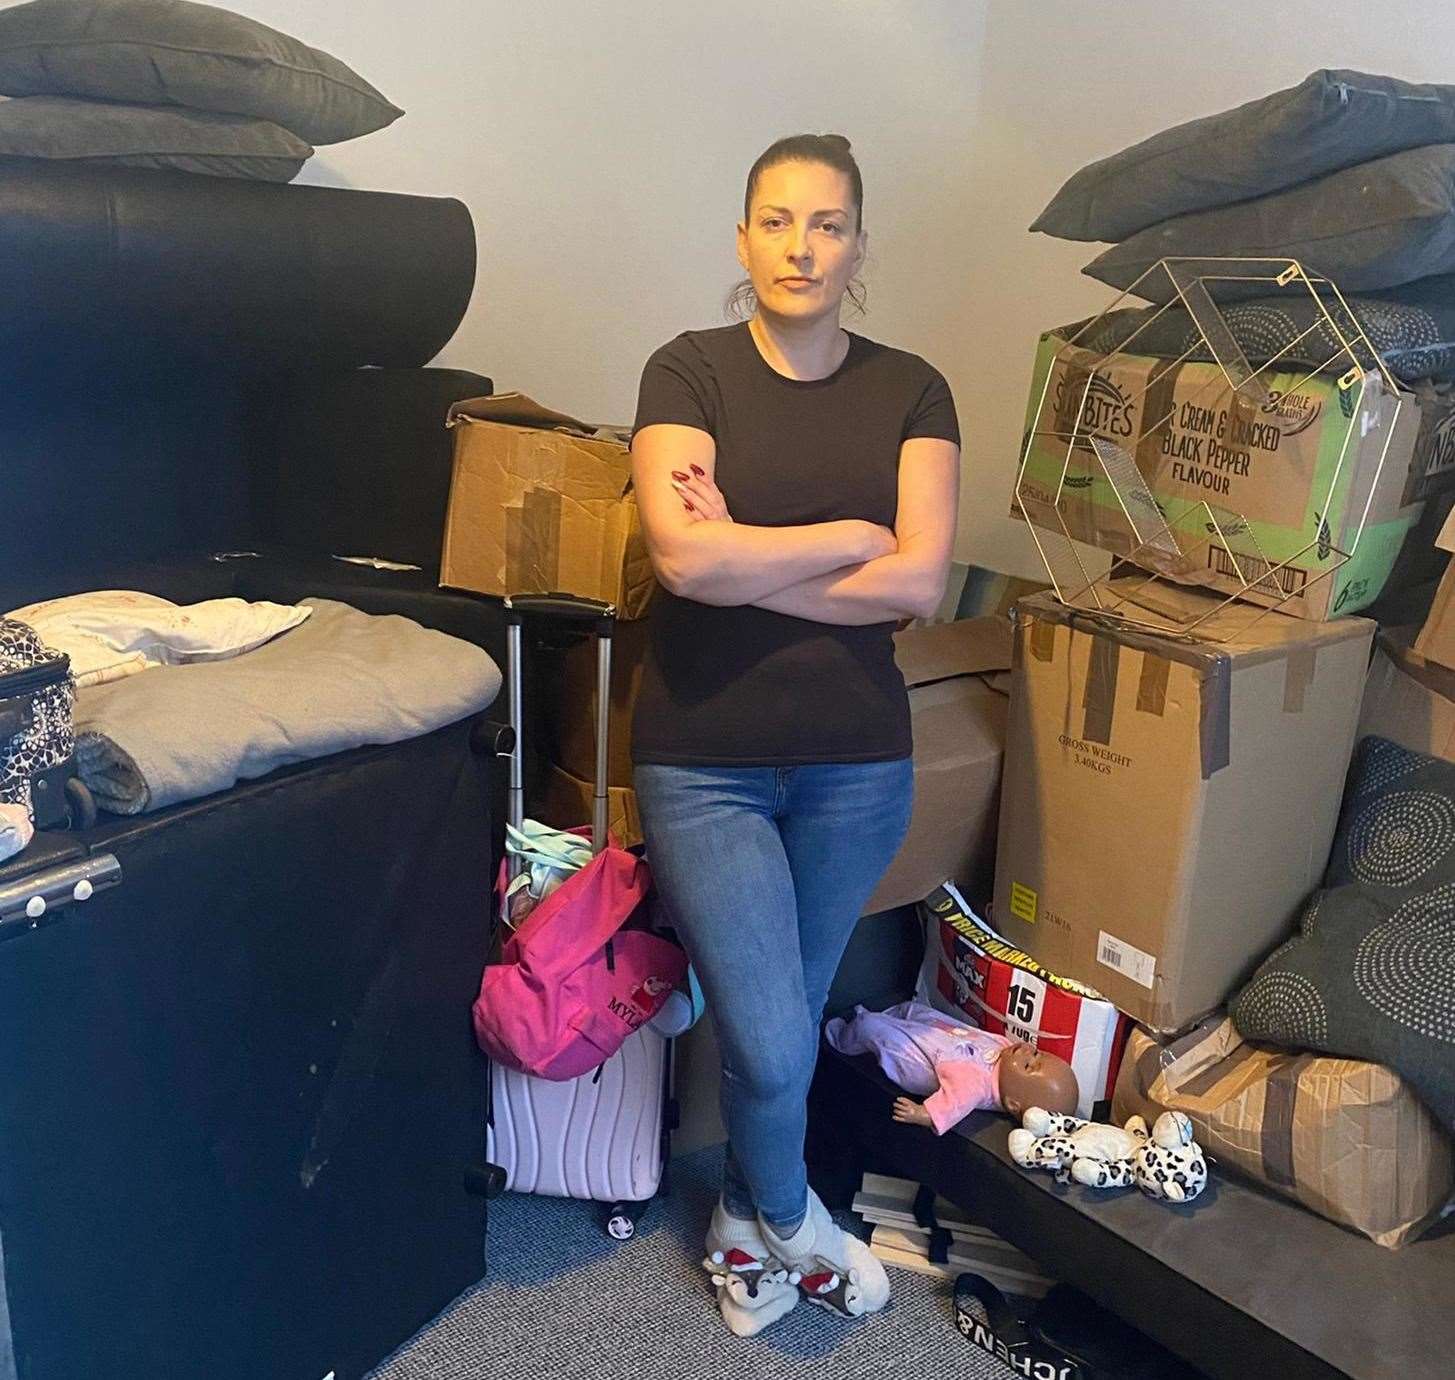 When Gemma Cushing arrived at the Dover house, she found it was already furnished so there are now boxes everywhere and little room to move